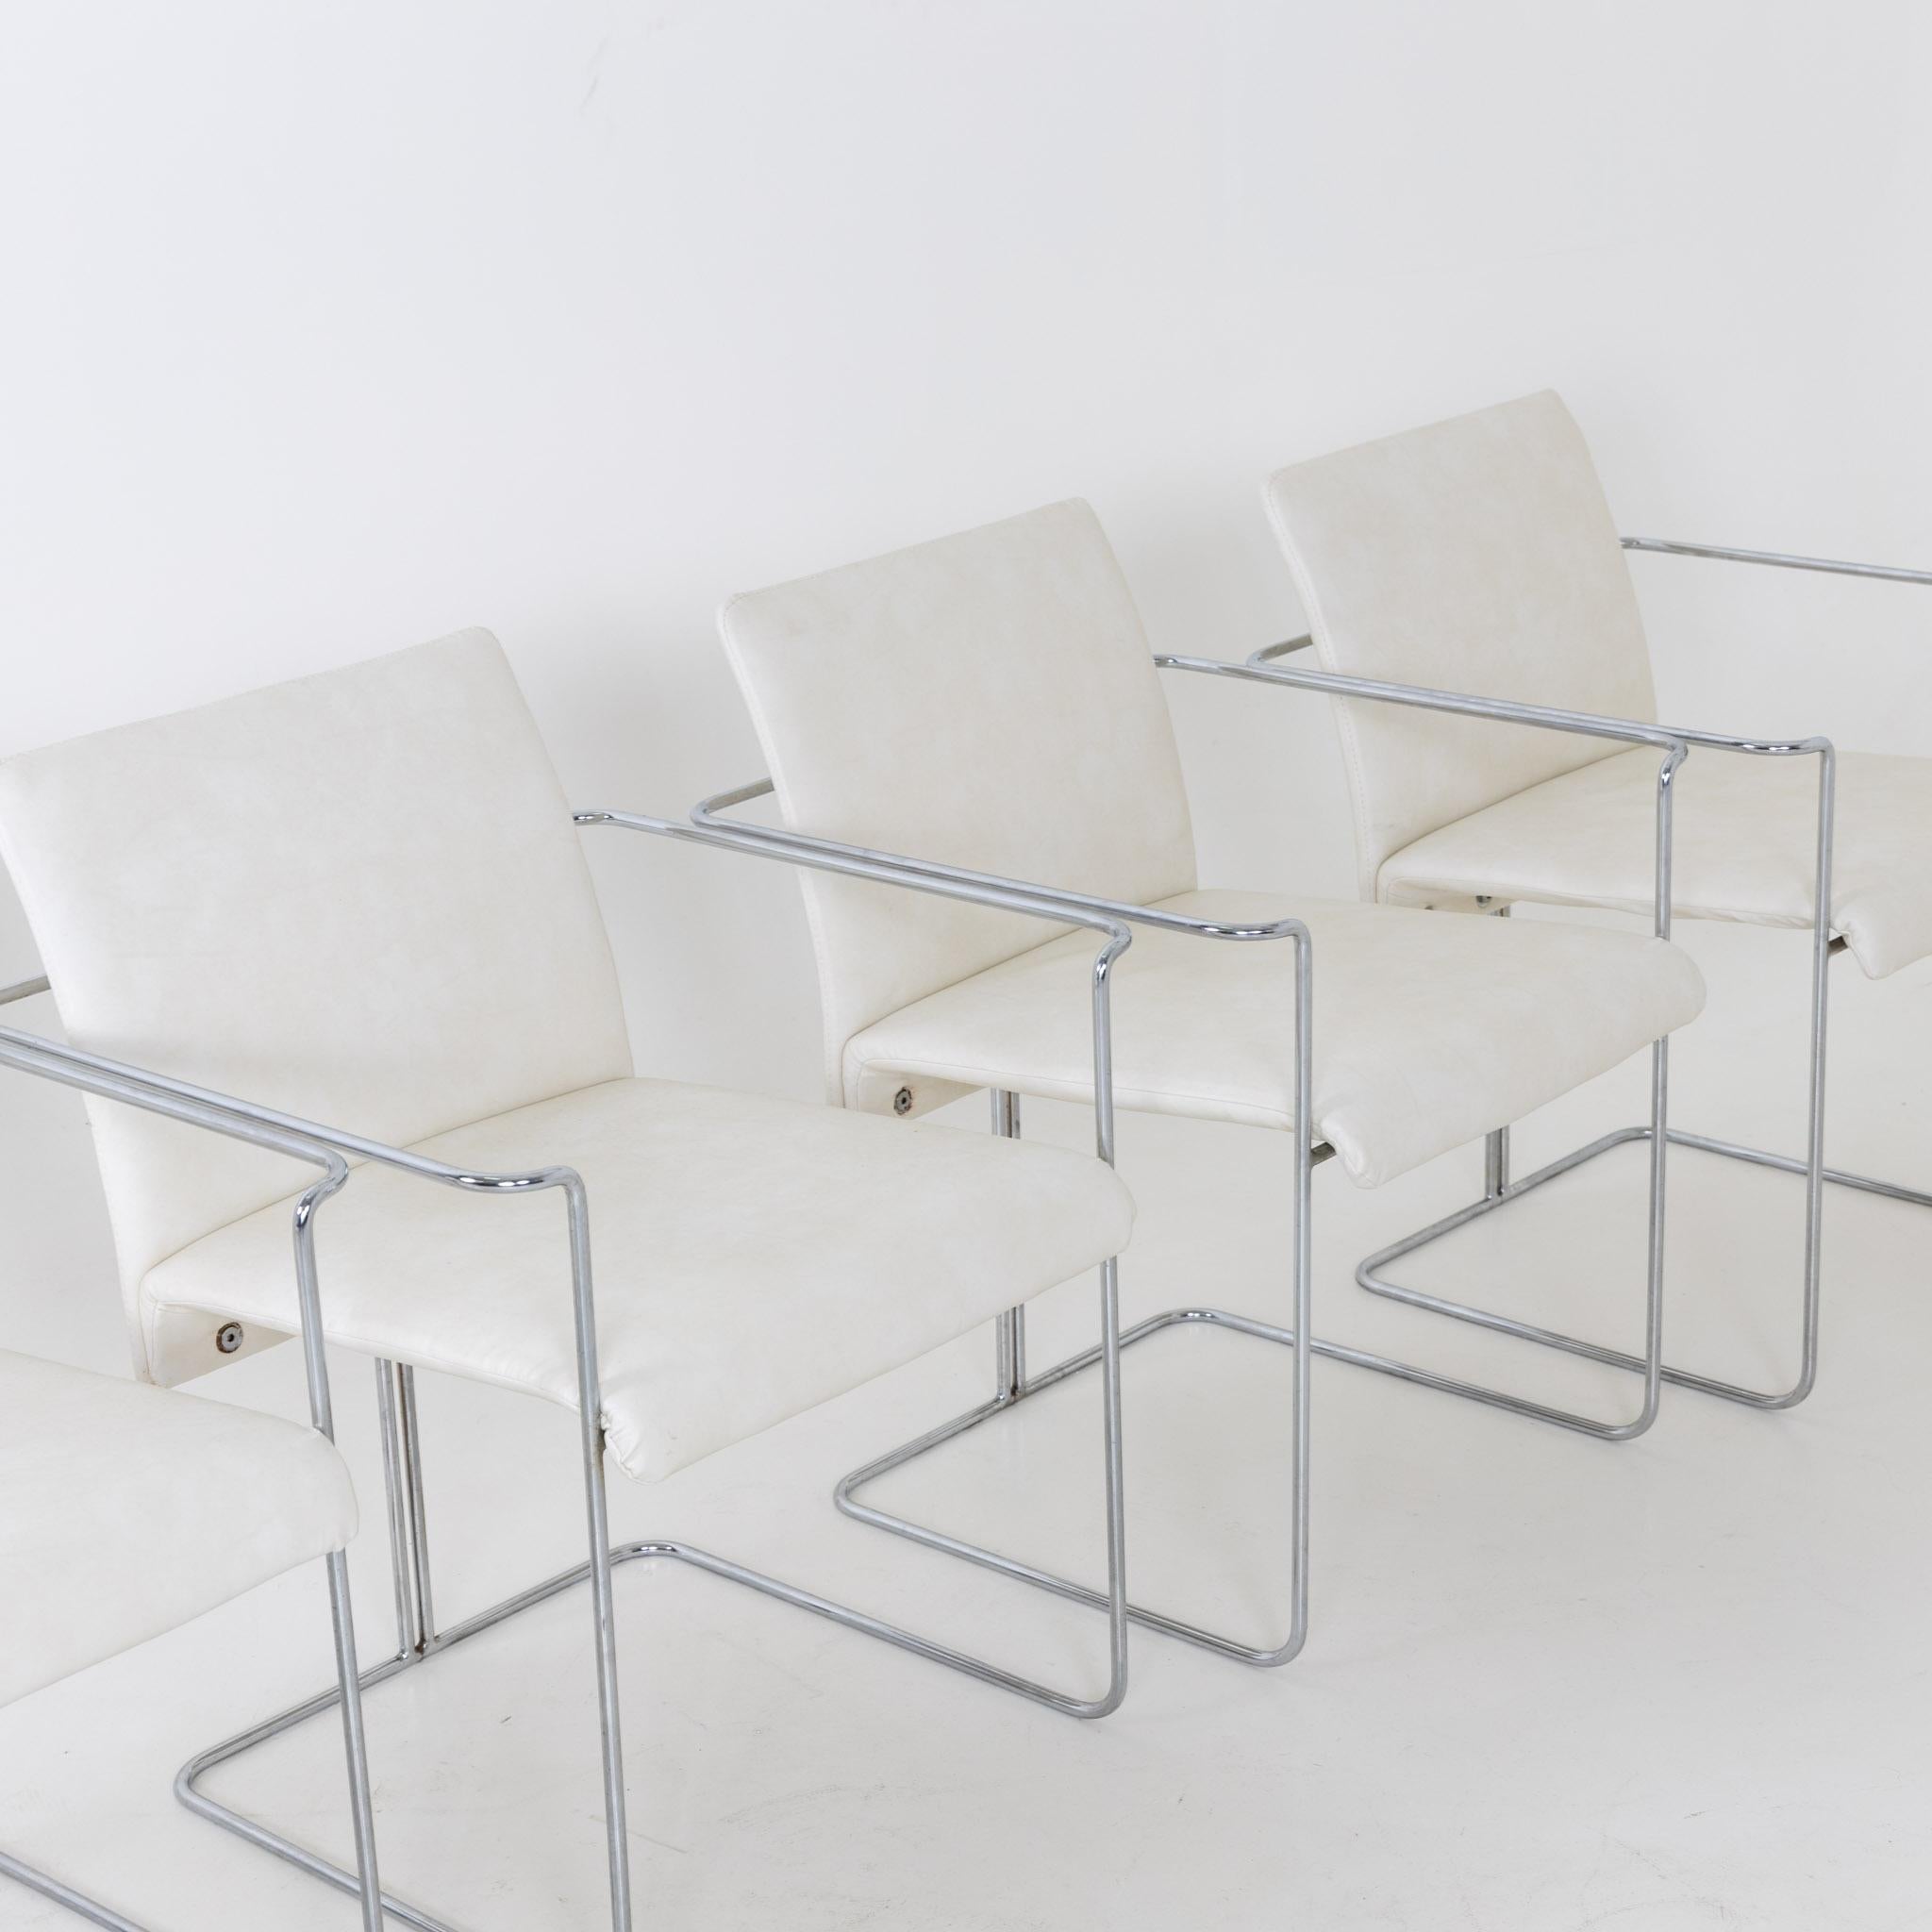 Set of six Modernist dining chairs by Ernesto Radaelli. 
Chrome plated steel frames and leather upholstered seats.